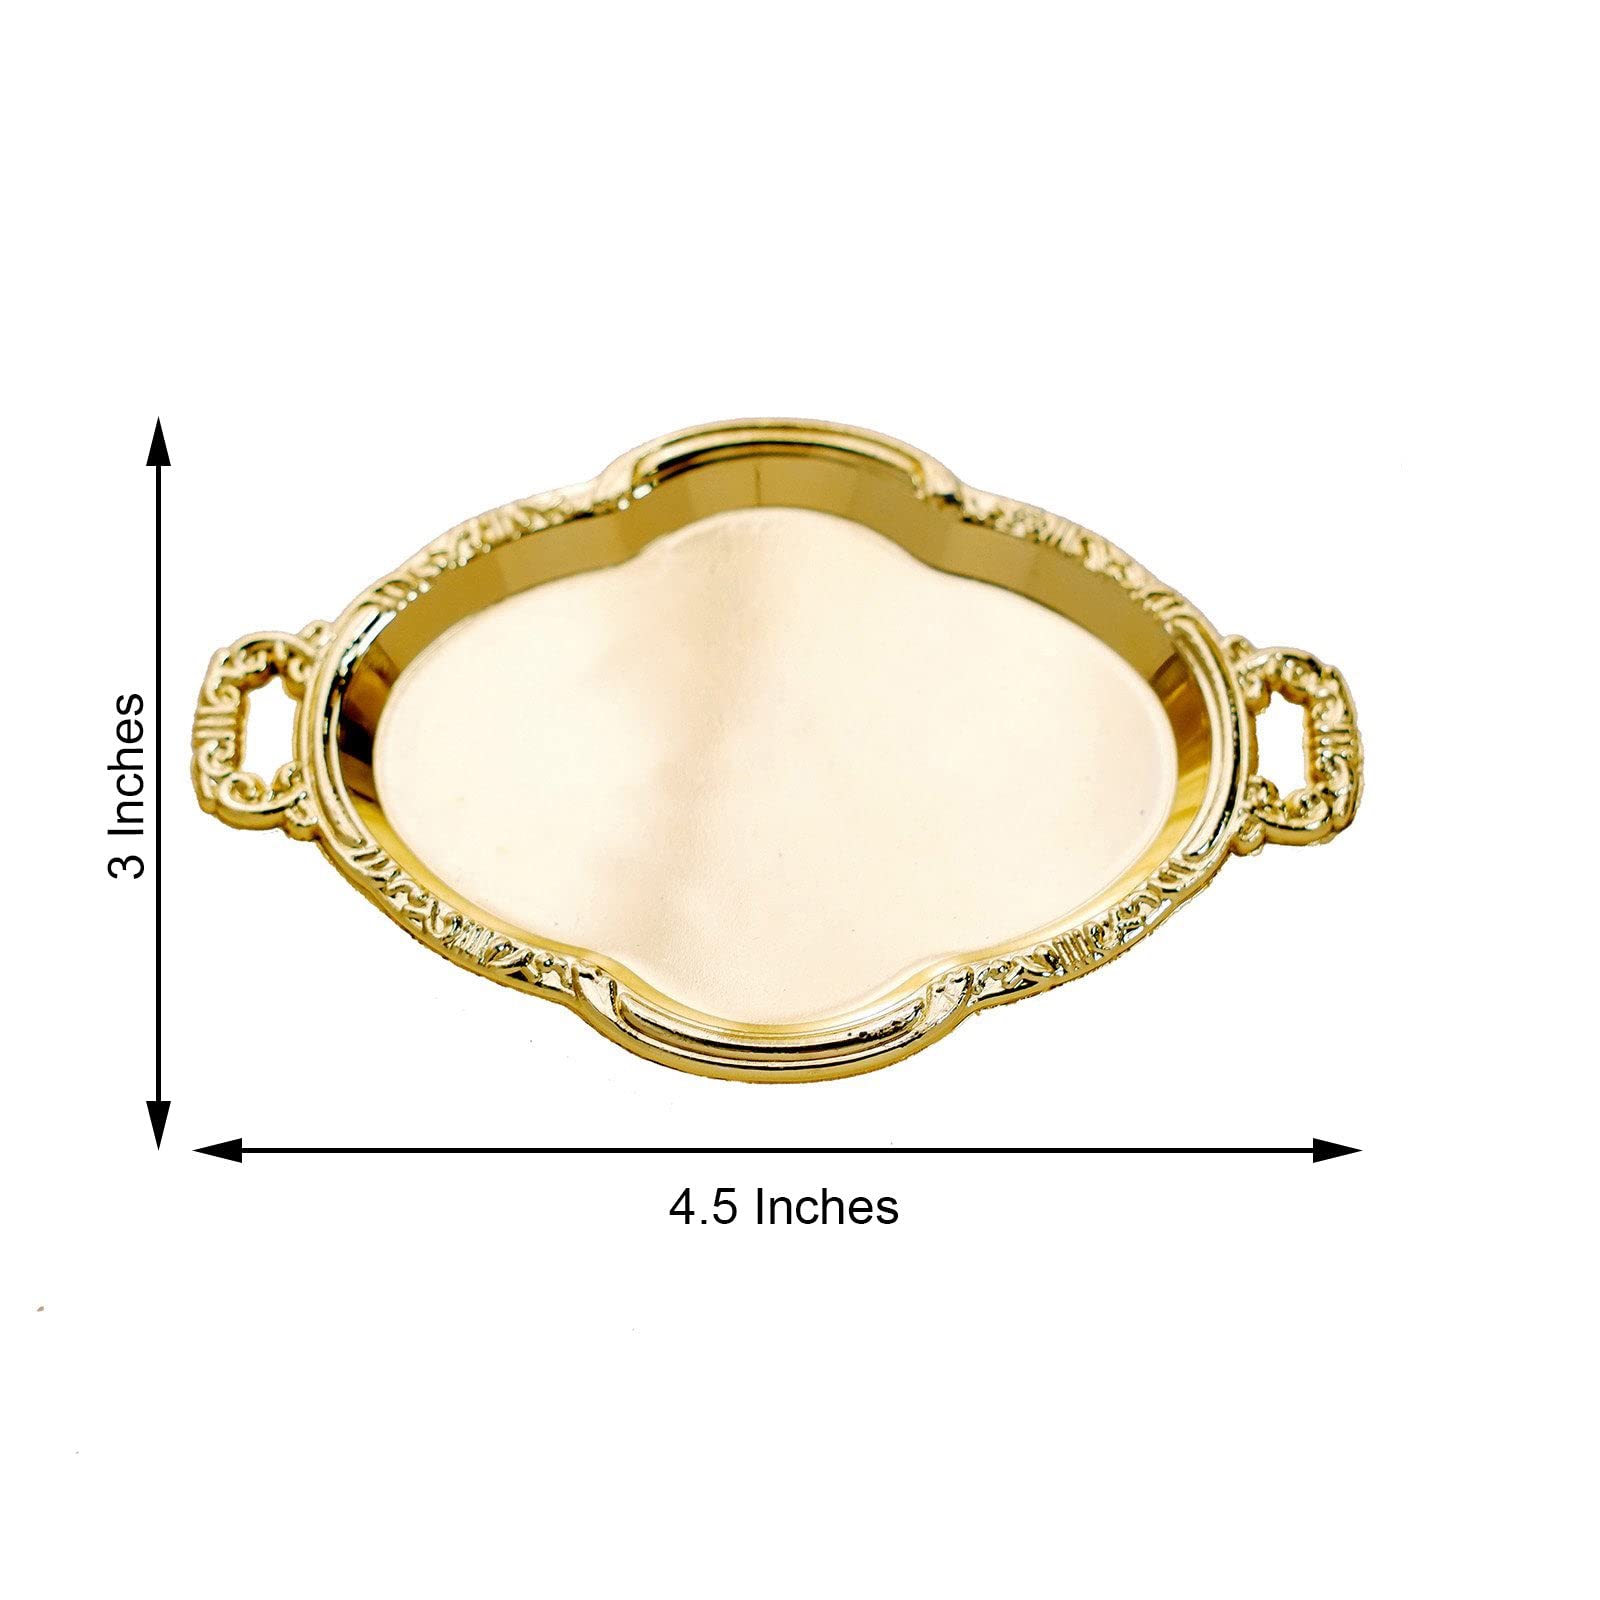 Efavormart 12 Pack - 4.5" Gold Oval Mini Candy Display Tray Favors - Baroque Design for Wedding, Bridal Shower, Baby Shower, Birthday, Candy Jars Decorations